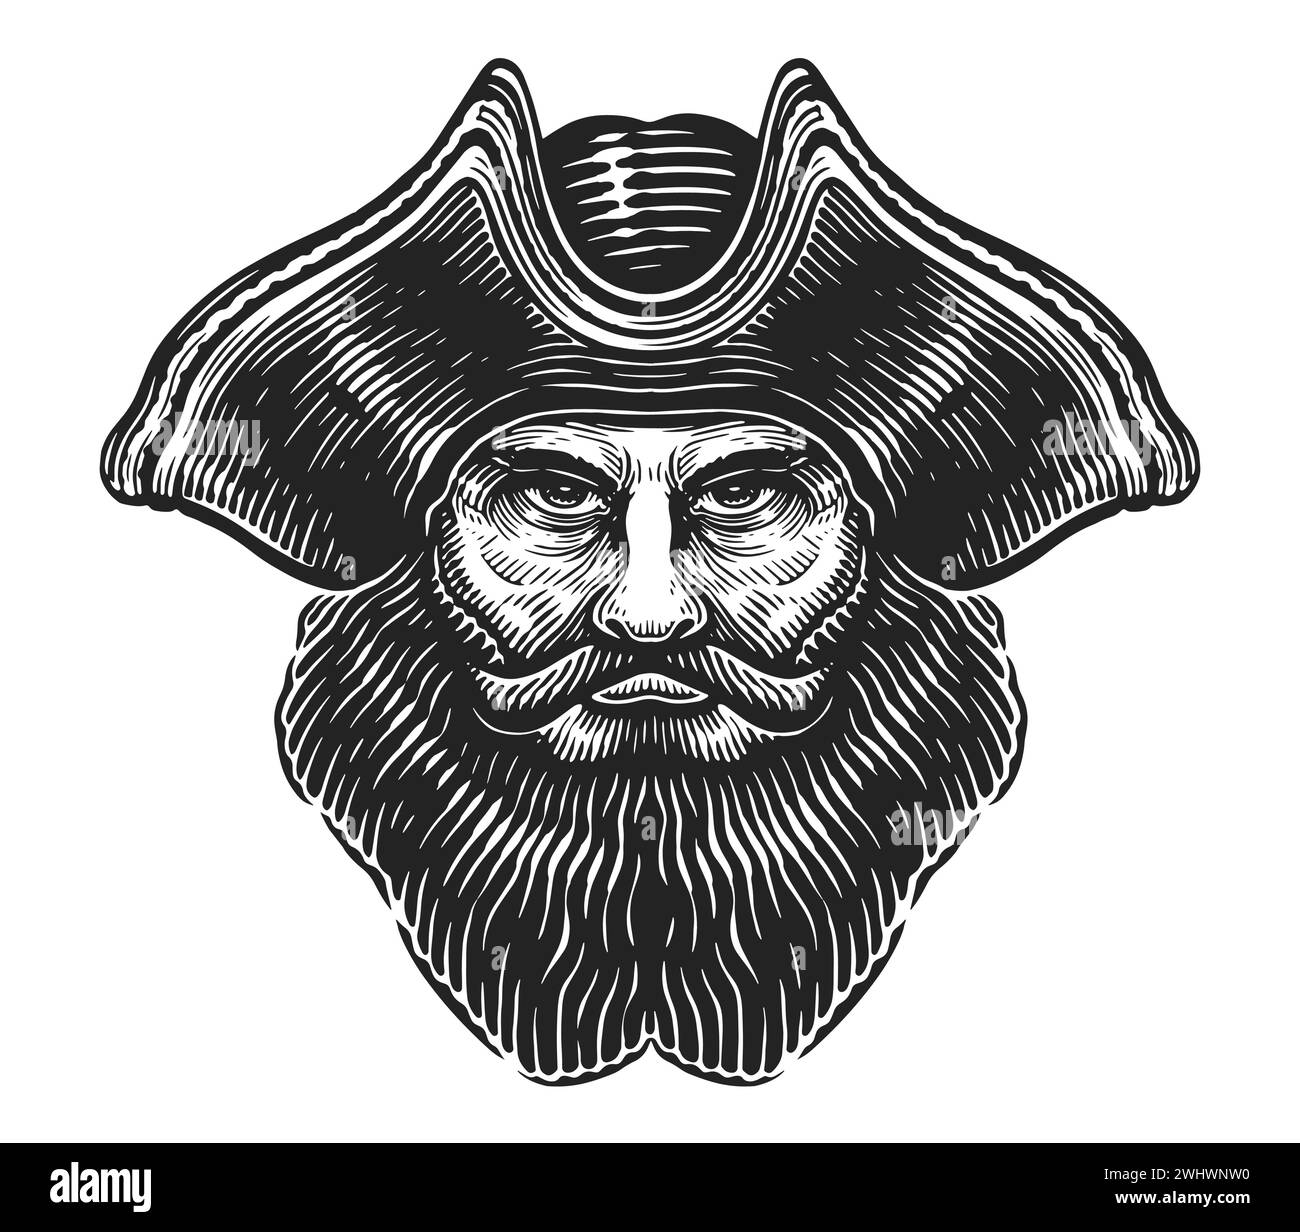 Vector illustration of a pirate head. Hand drawn evil corsair with mustache and beard wearing cocked hat Stock Vector